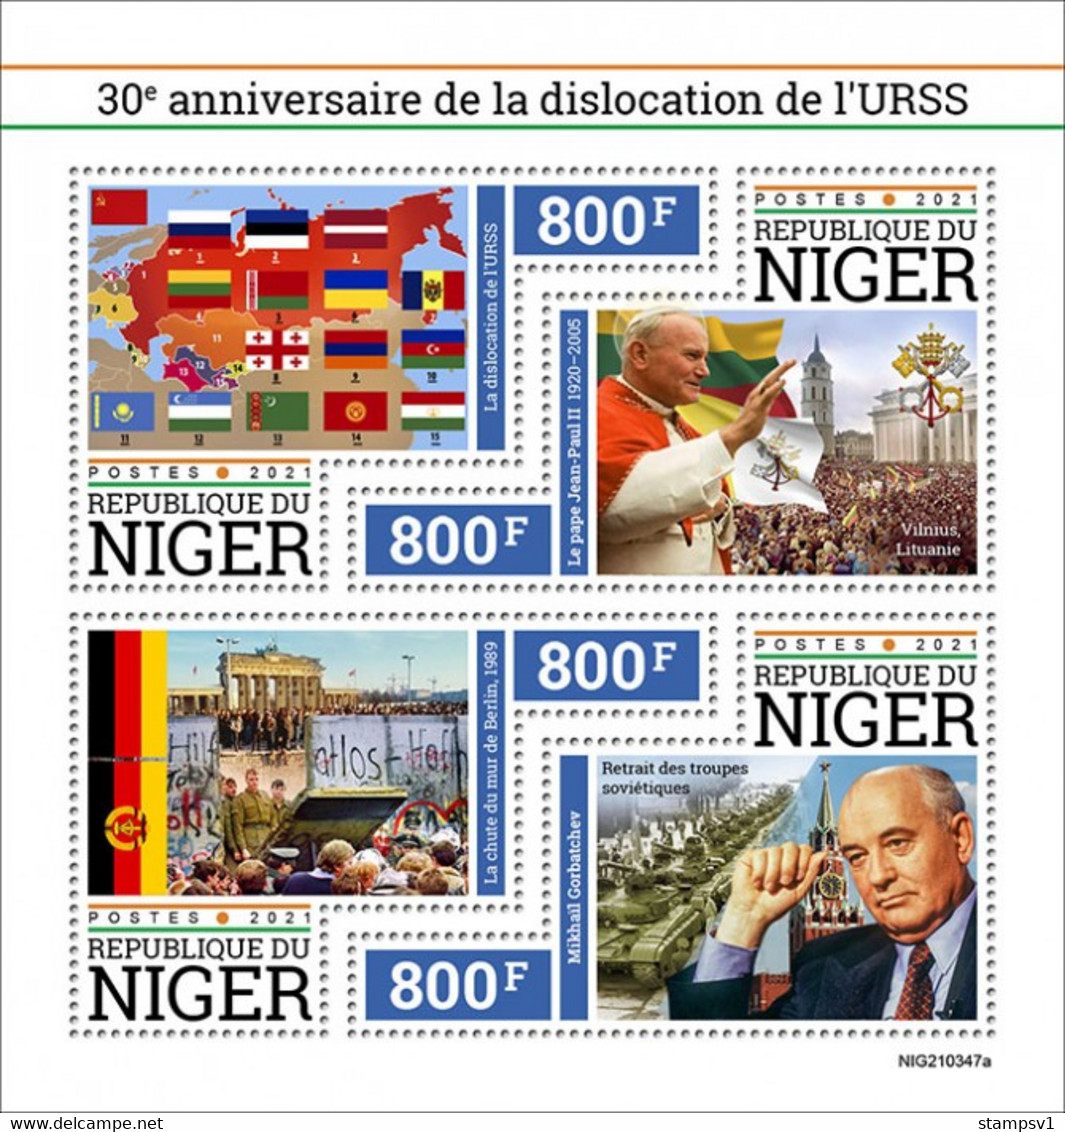 Niger  2021 30 Years Of The Dissolution Of The SovietUnion.  Flags.  (347a) OFFICIAL ISSUE - Timbres